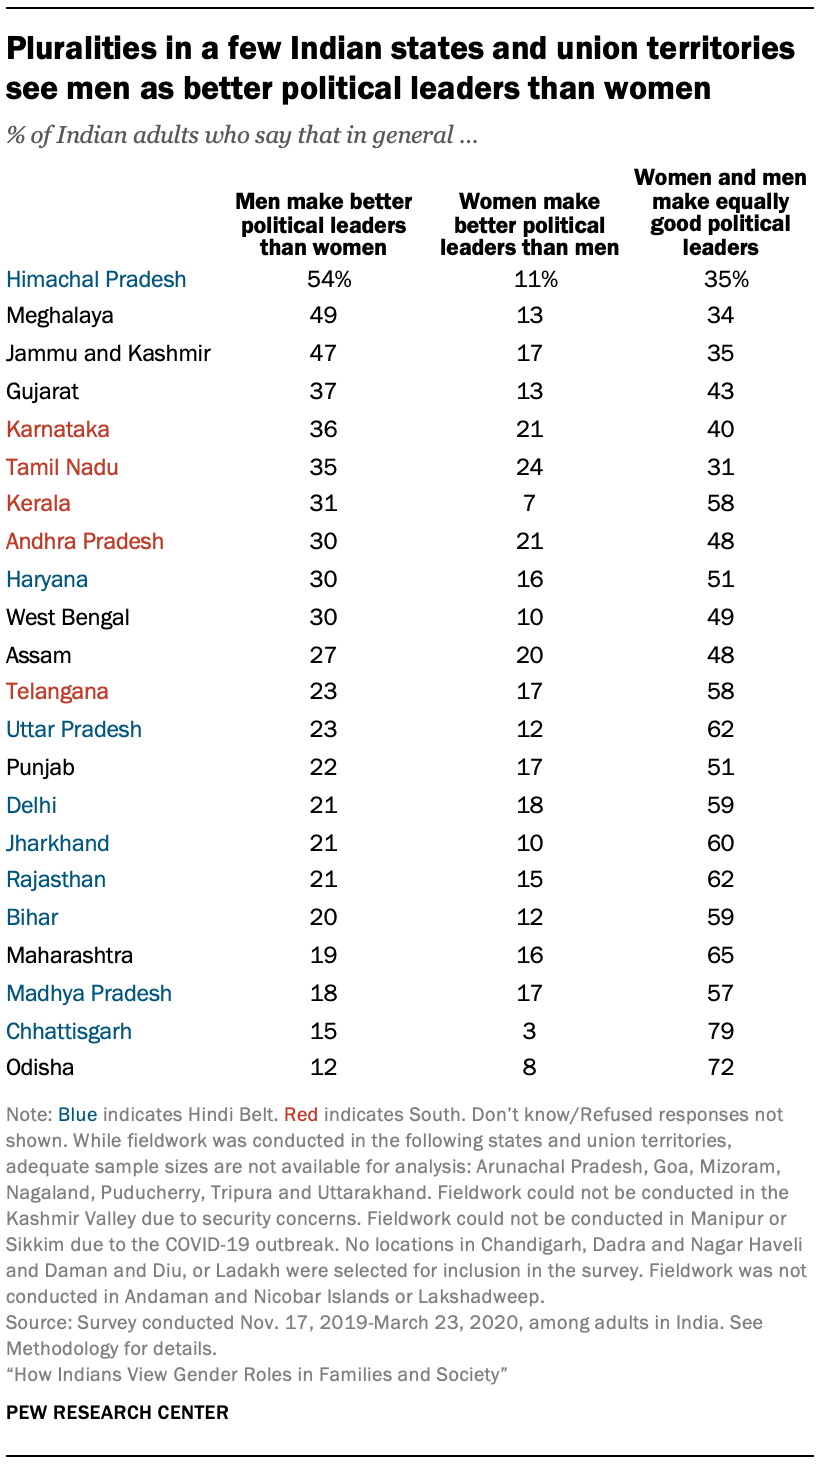 Pluralities in a few Indian states and union territories see men as better political leaders than women